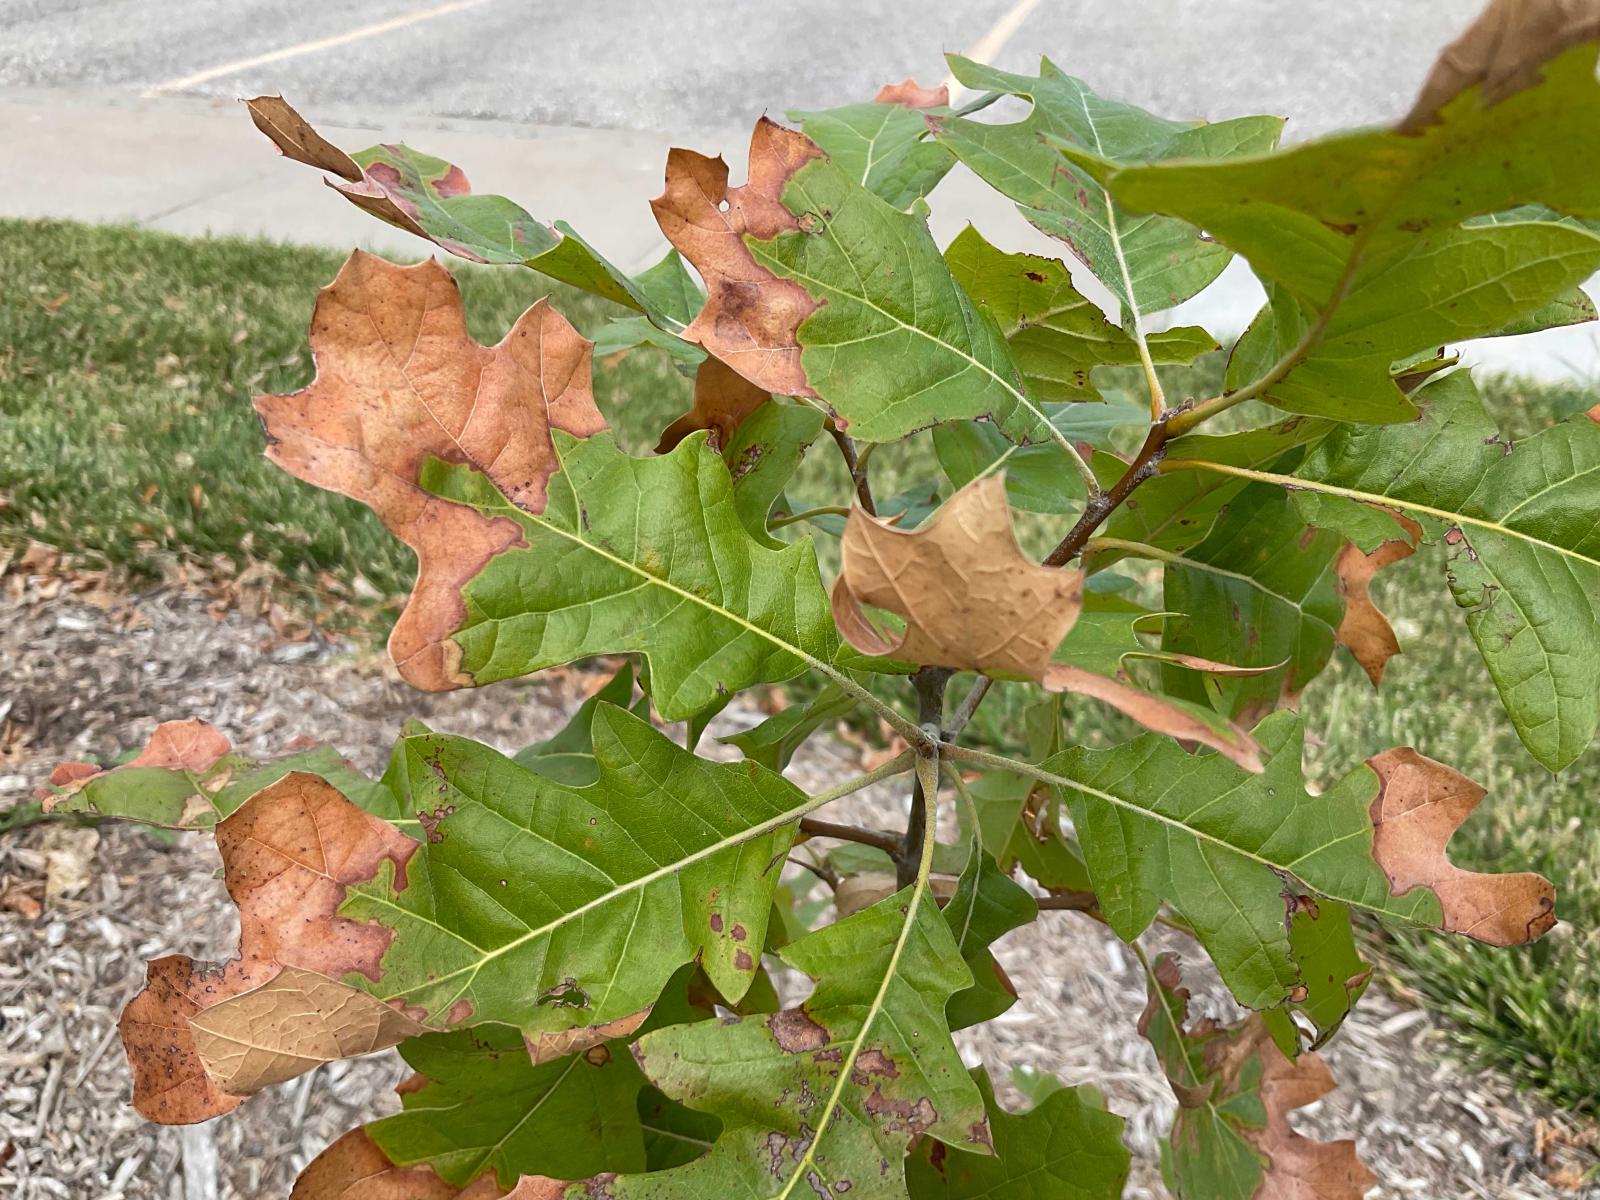 Image of leaf scorch on young black oak tree. 